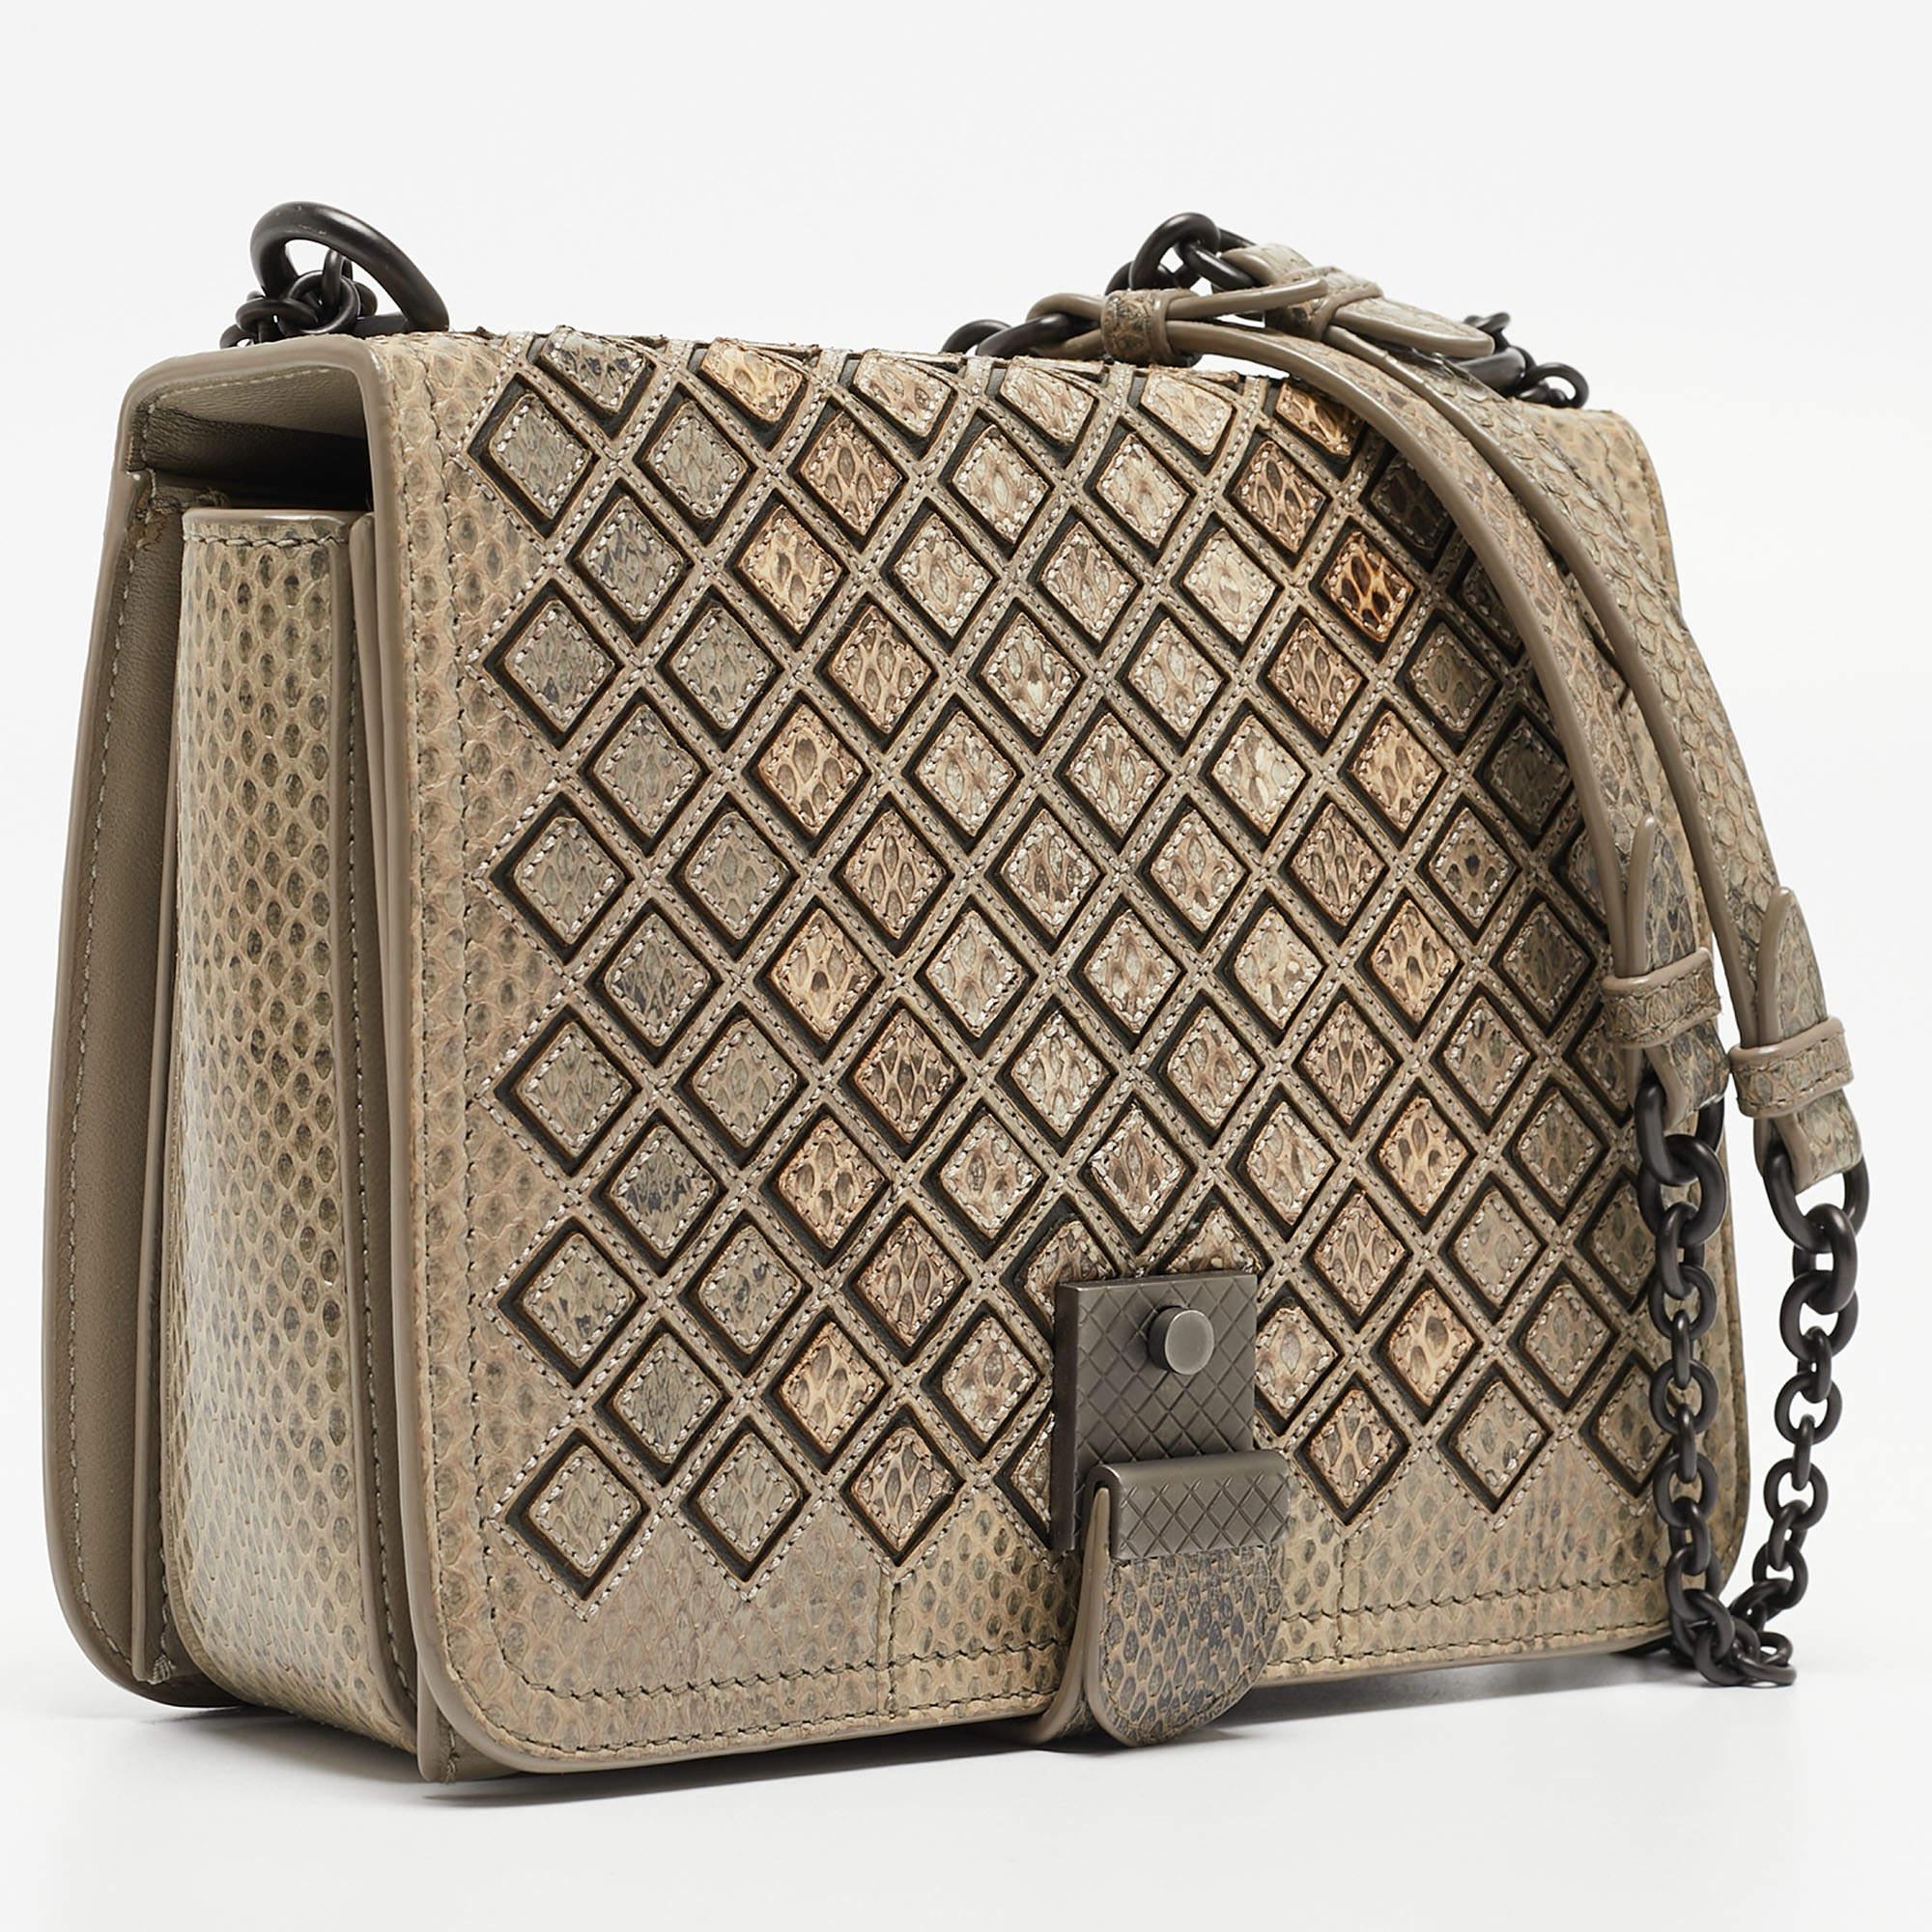 The fashion house’s tradition of excellence, coupled with modern design sensibilities, works to make this Bottega Veneta bag one of a kind. It's a fabulous accessory for everyday use.

